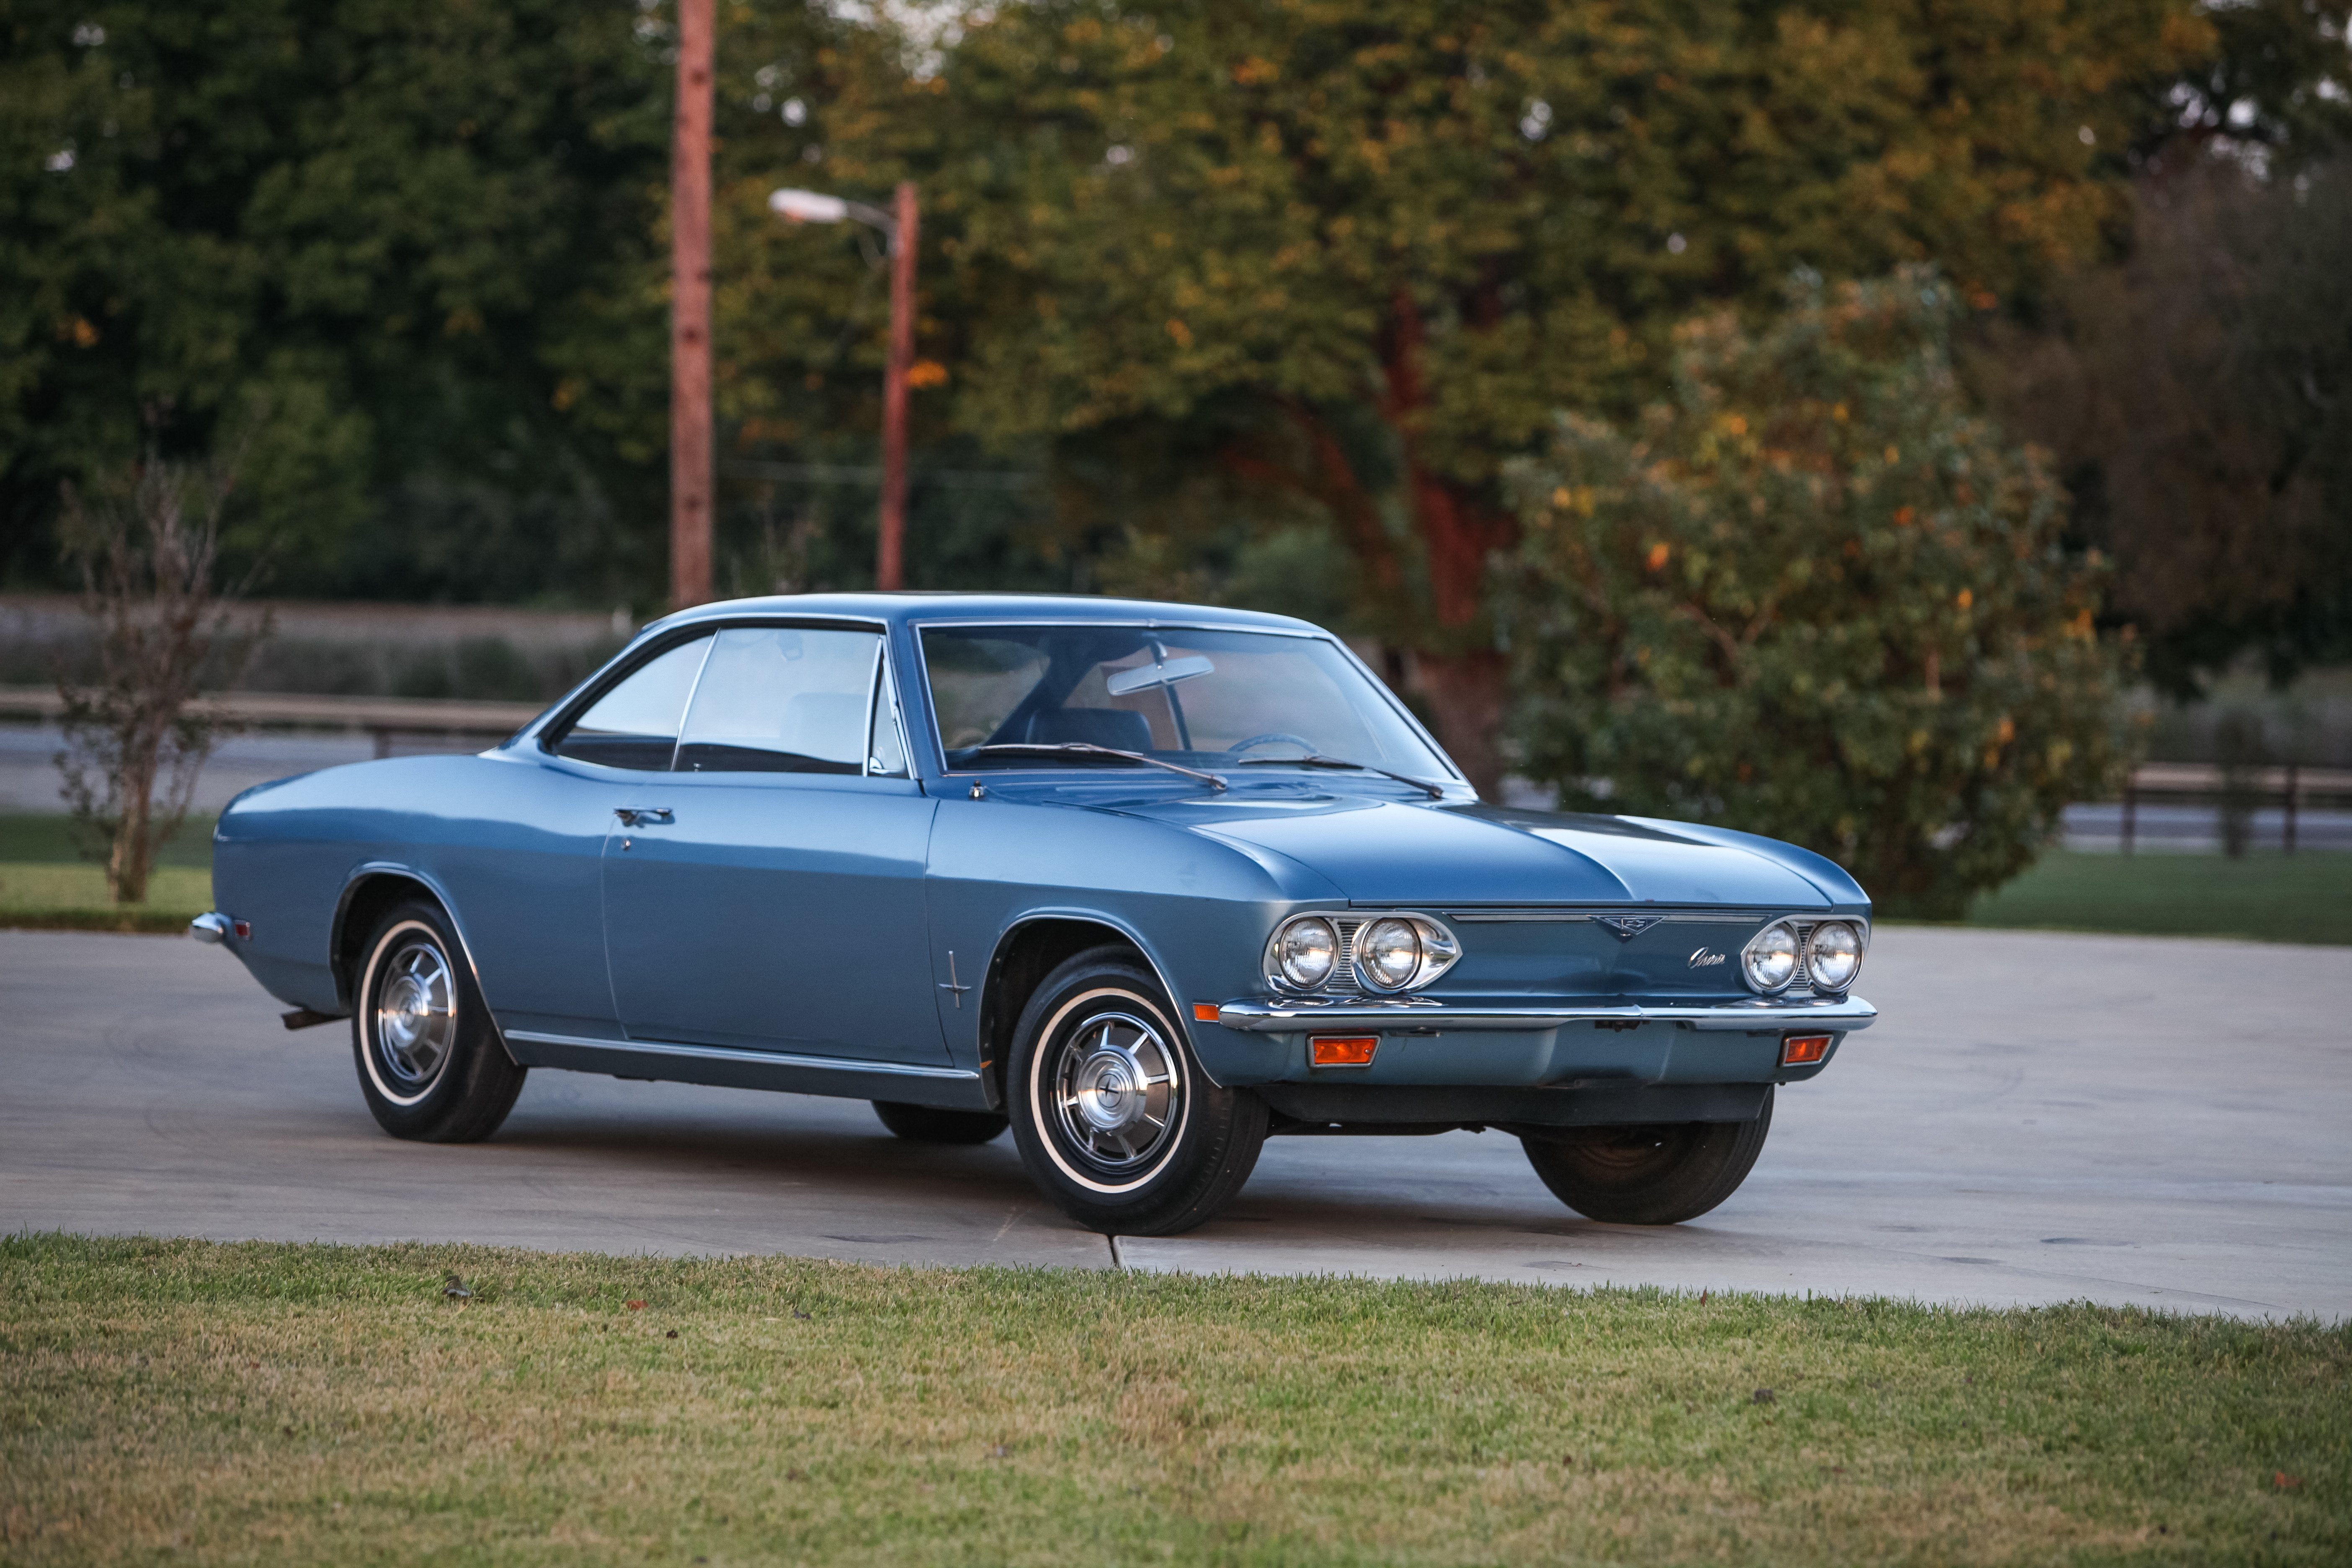 1969, Chevrolet, Corvair, Monza, Coupe, Compact, Classic, Usa, D, 5616x3744 02 Wallpaper